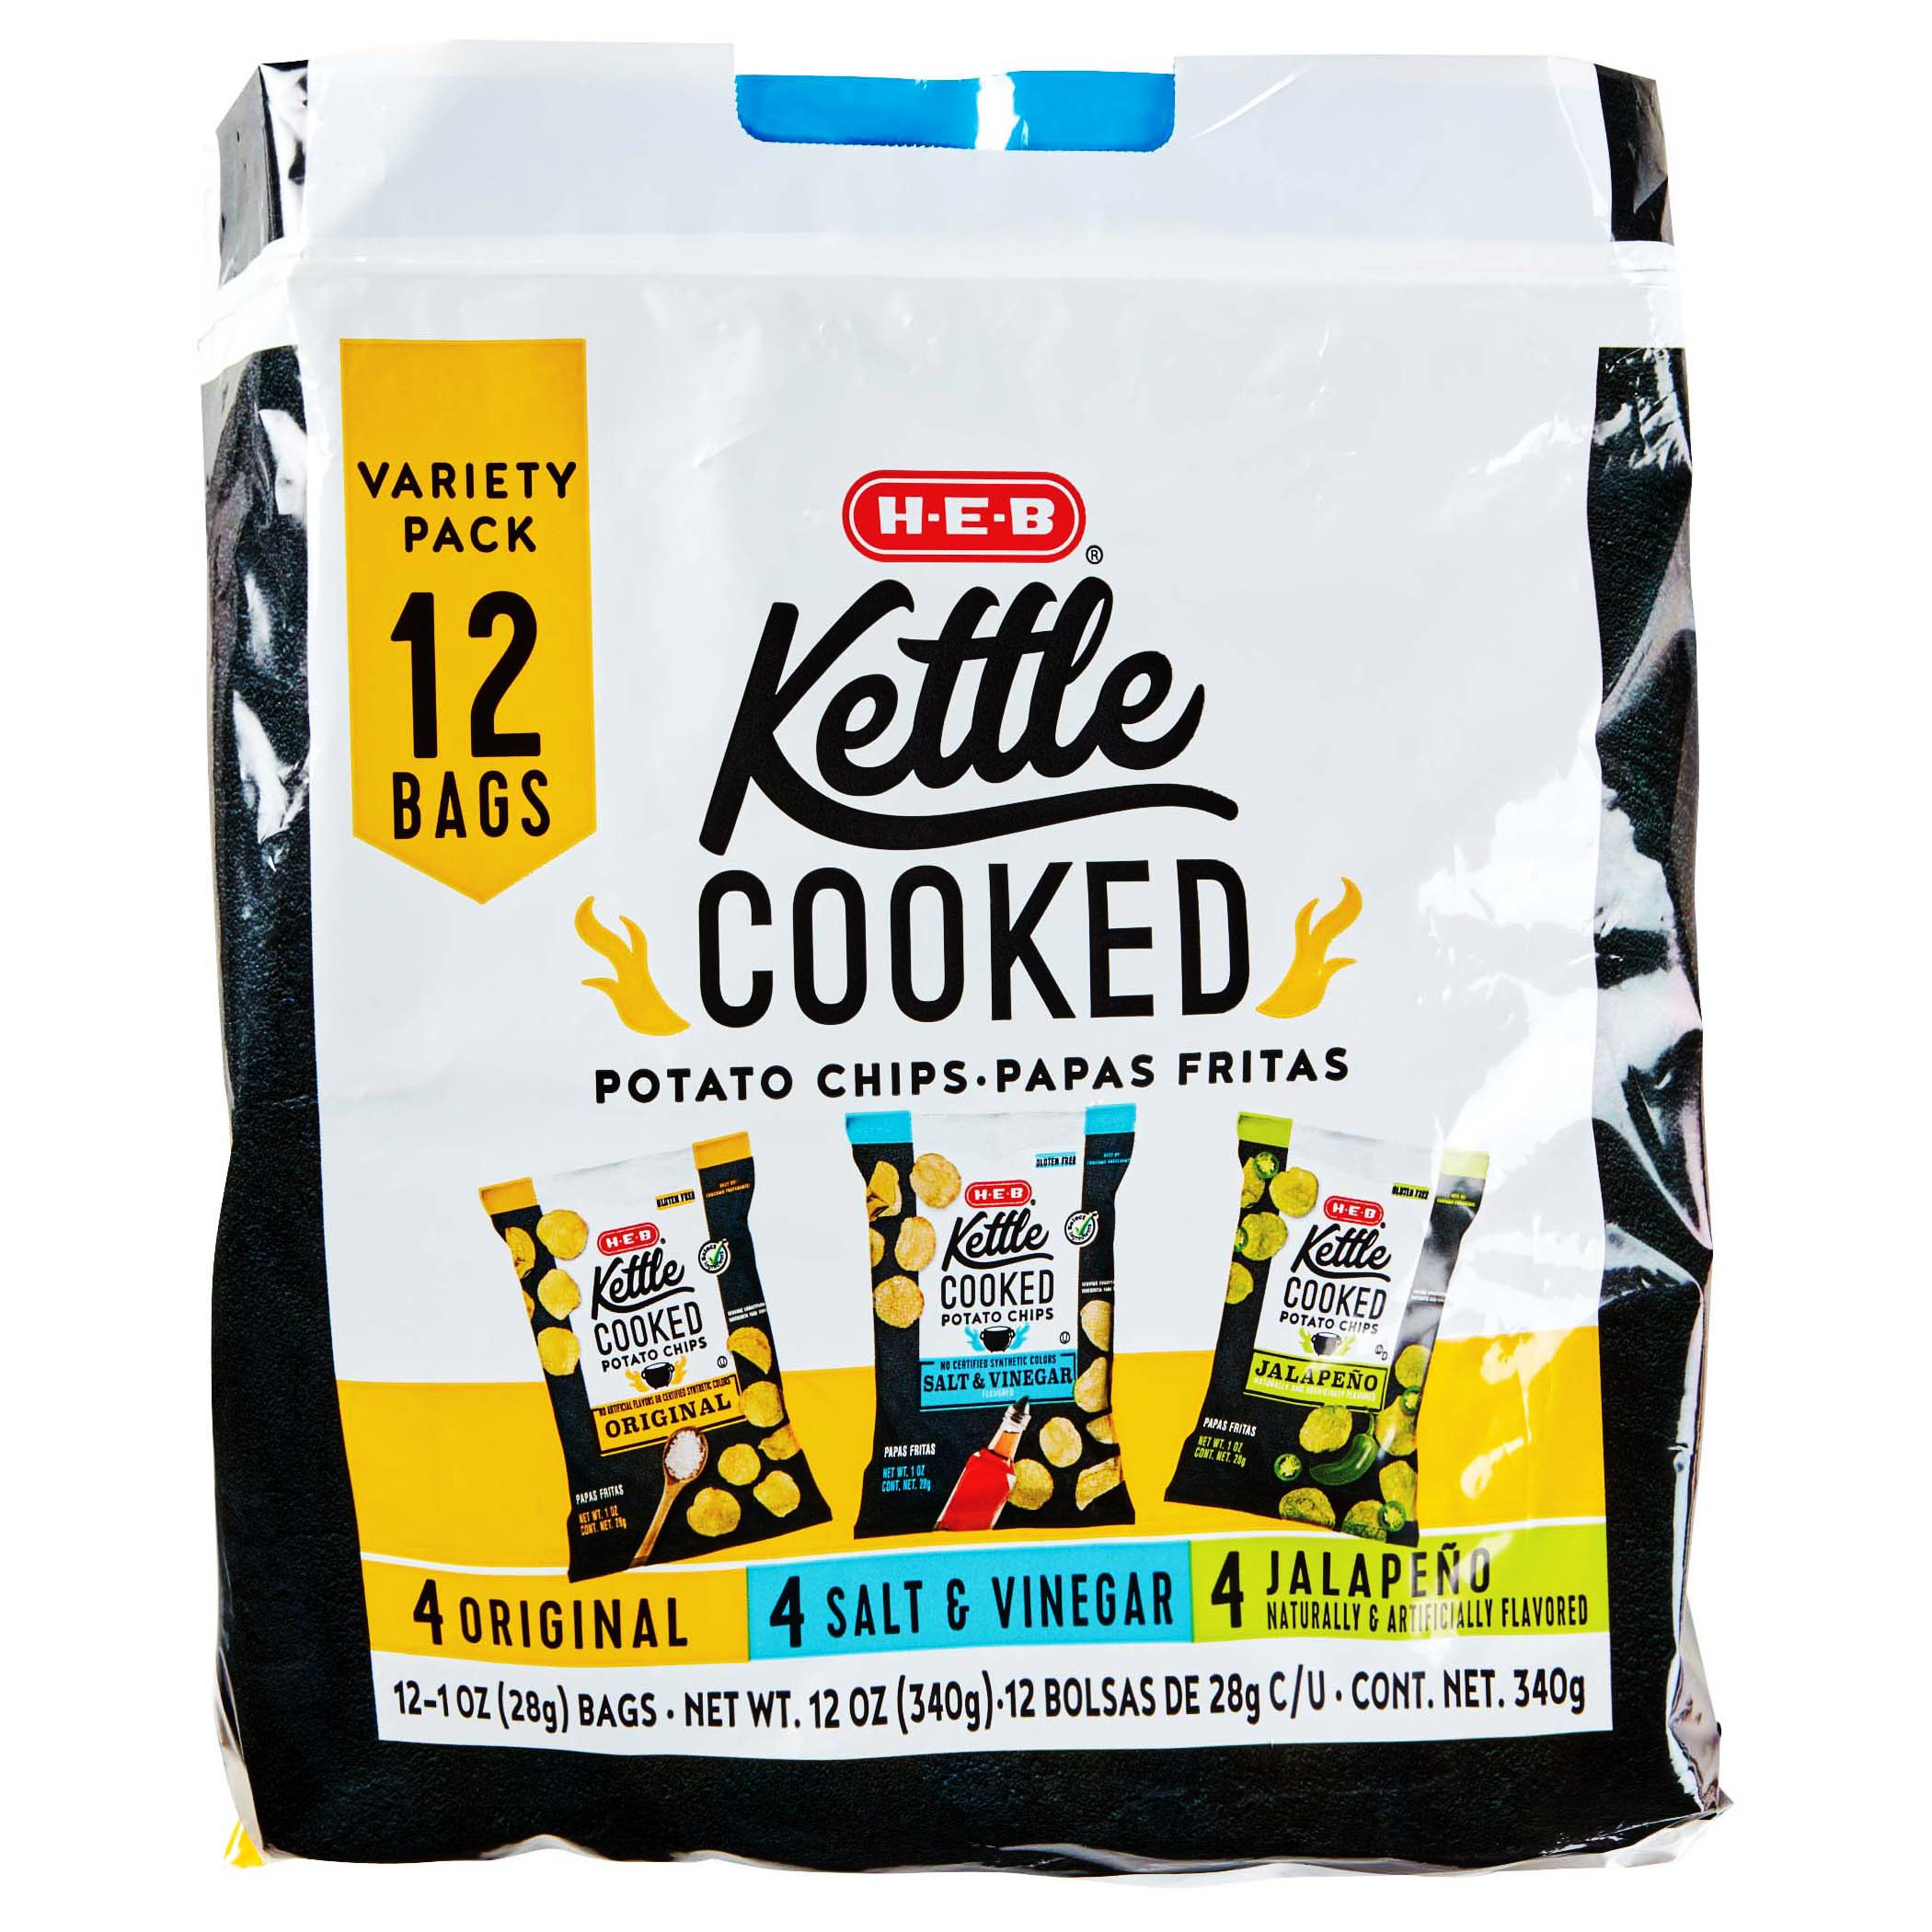 H-E-B Kettle Cooked Potato Chips Variety Pack 1 oz Bags - Shop Chips at H-E-B